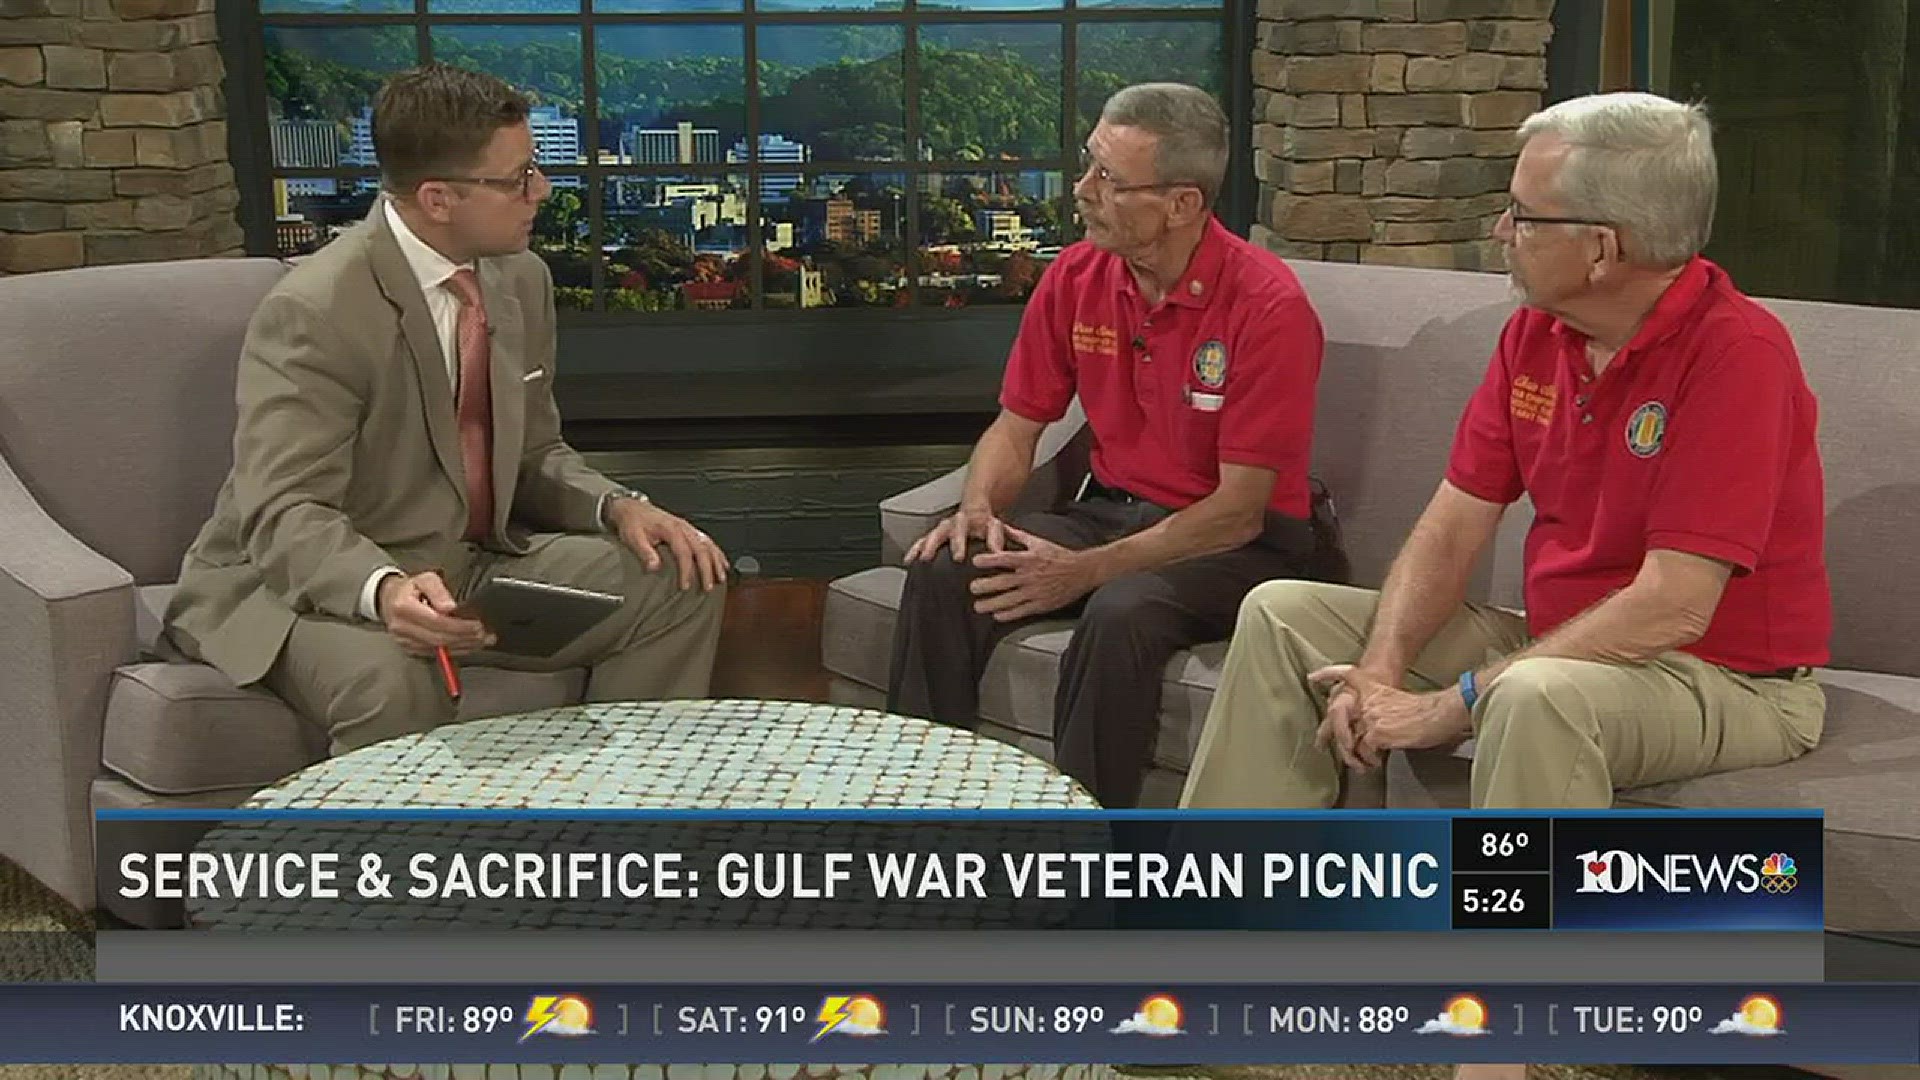 WBIR's John Becker sits down with a group of men to talk about an event organized by veterans for veterans.